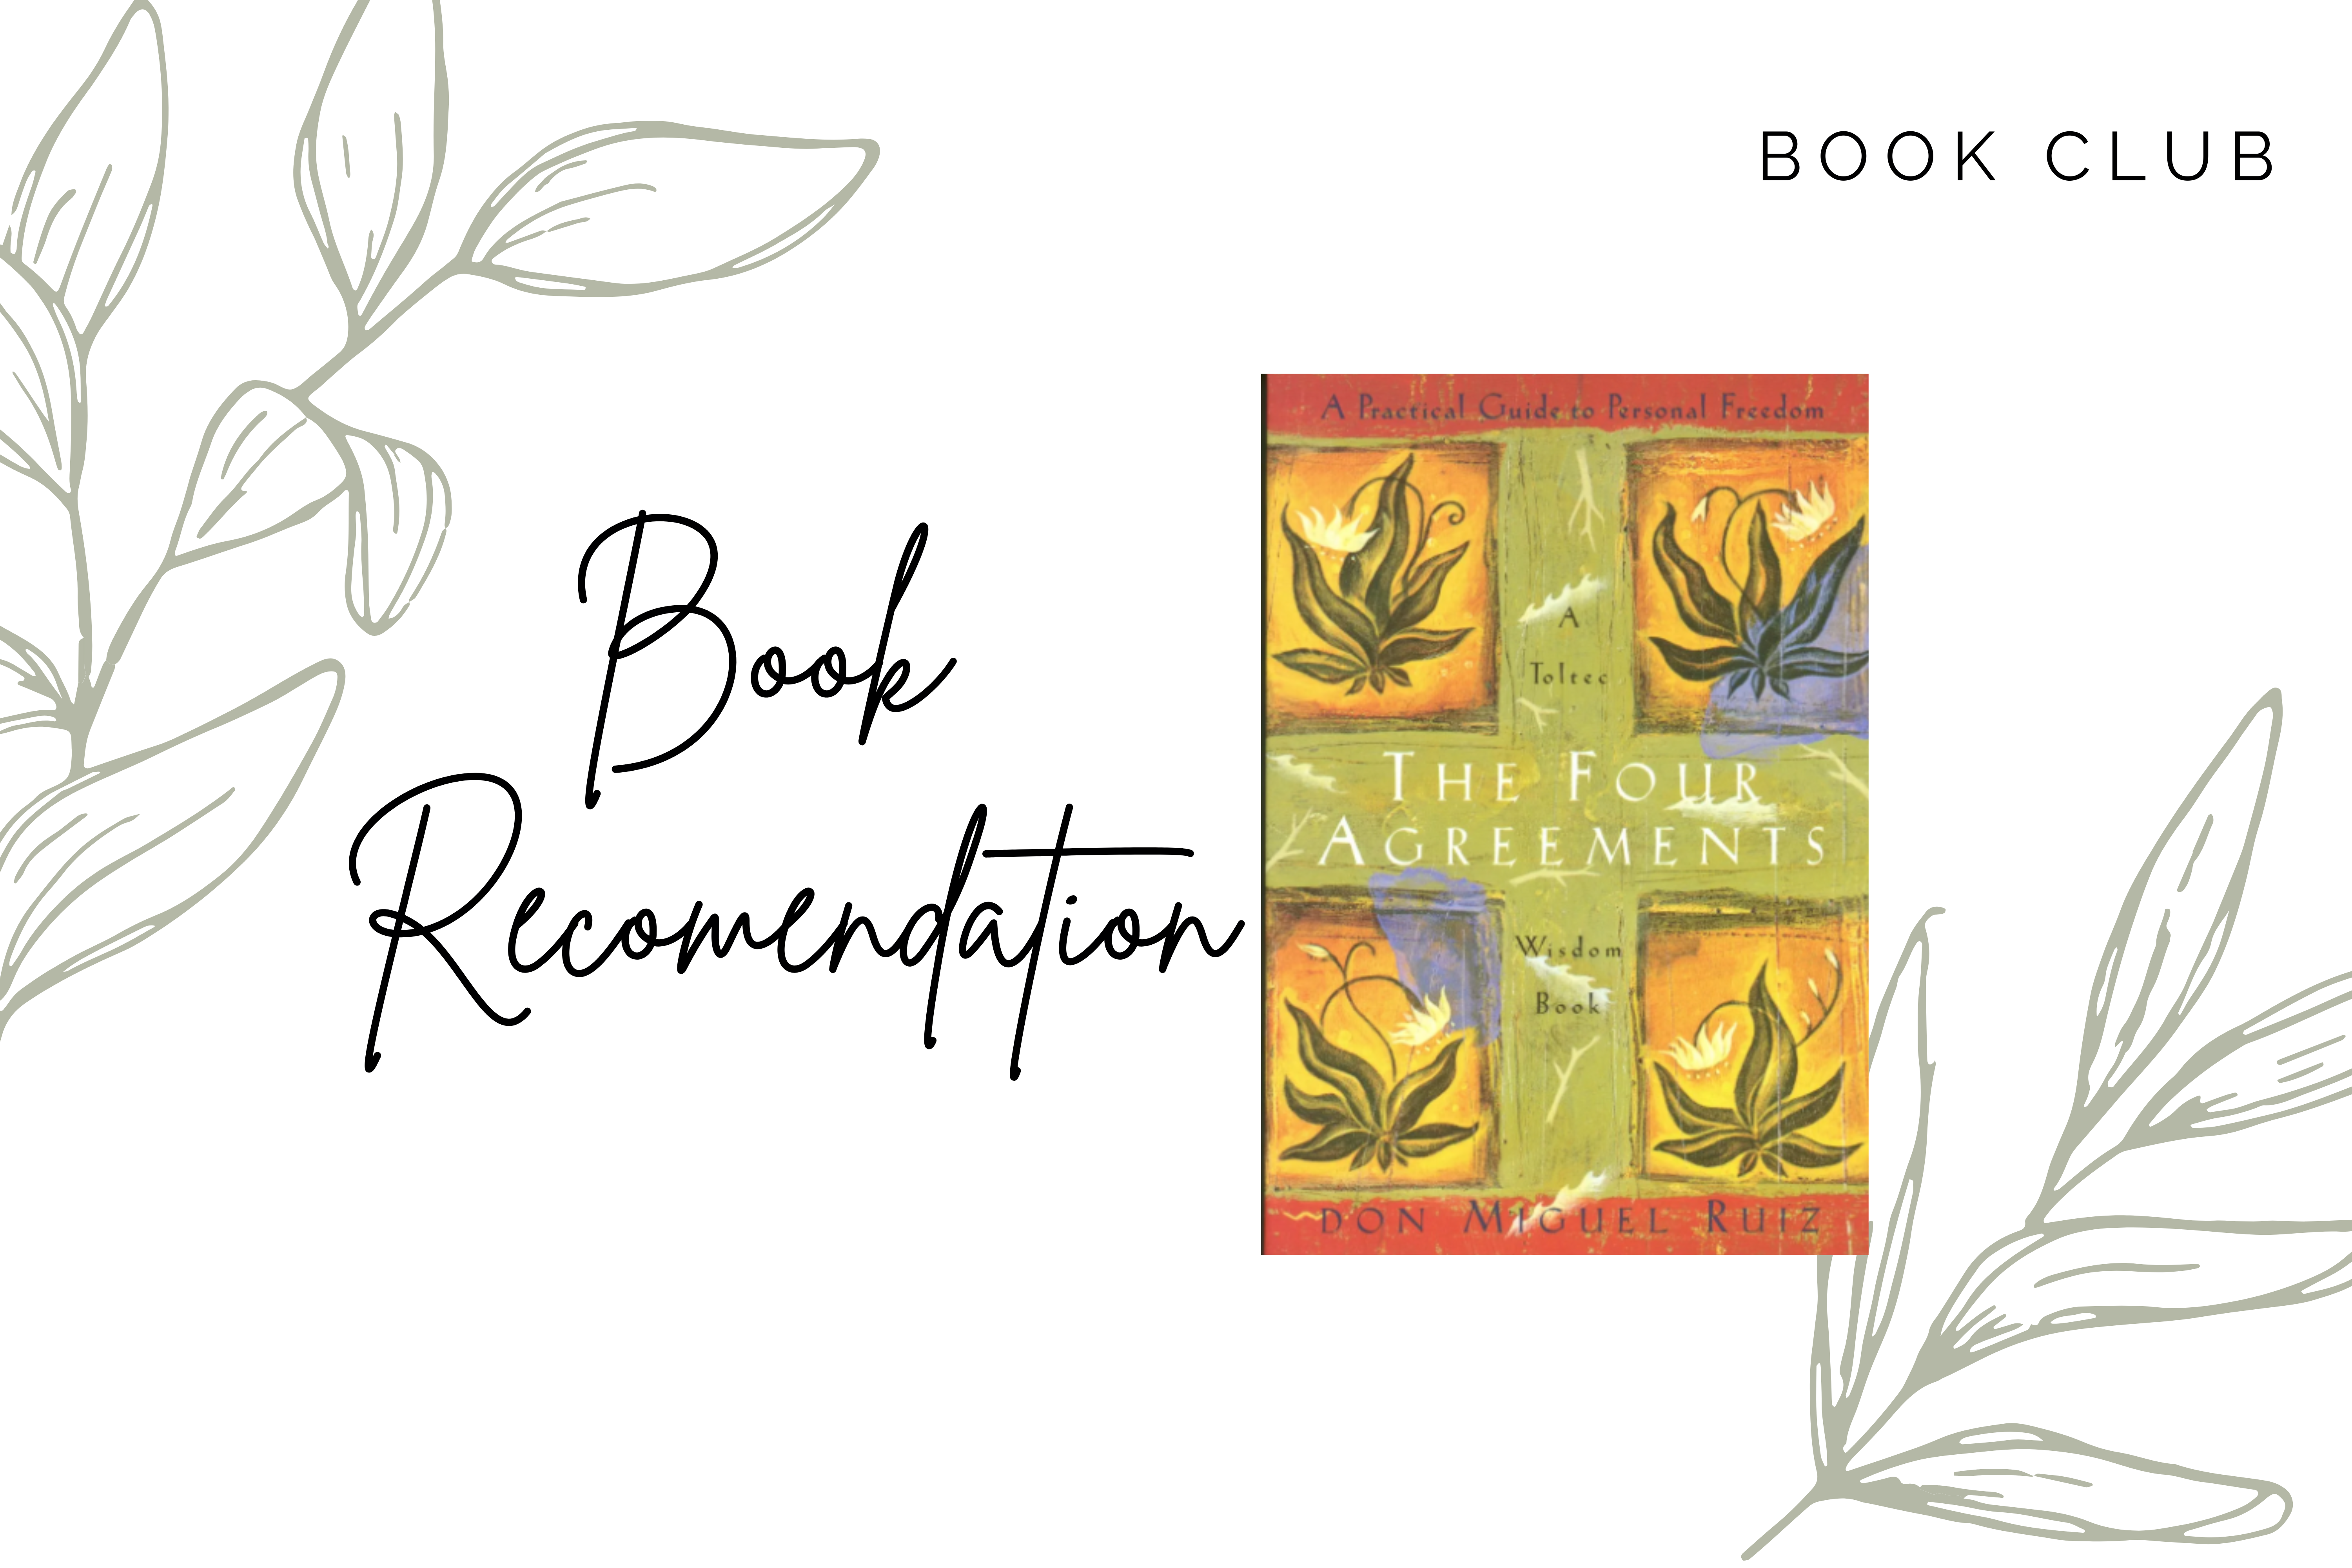 Book recommendation: The four Agreements